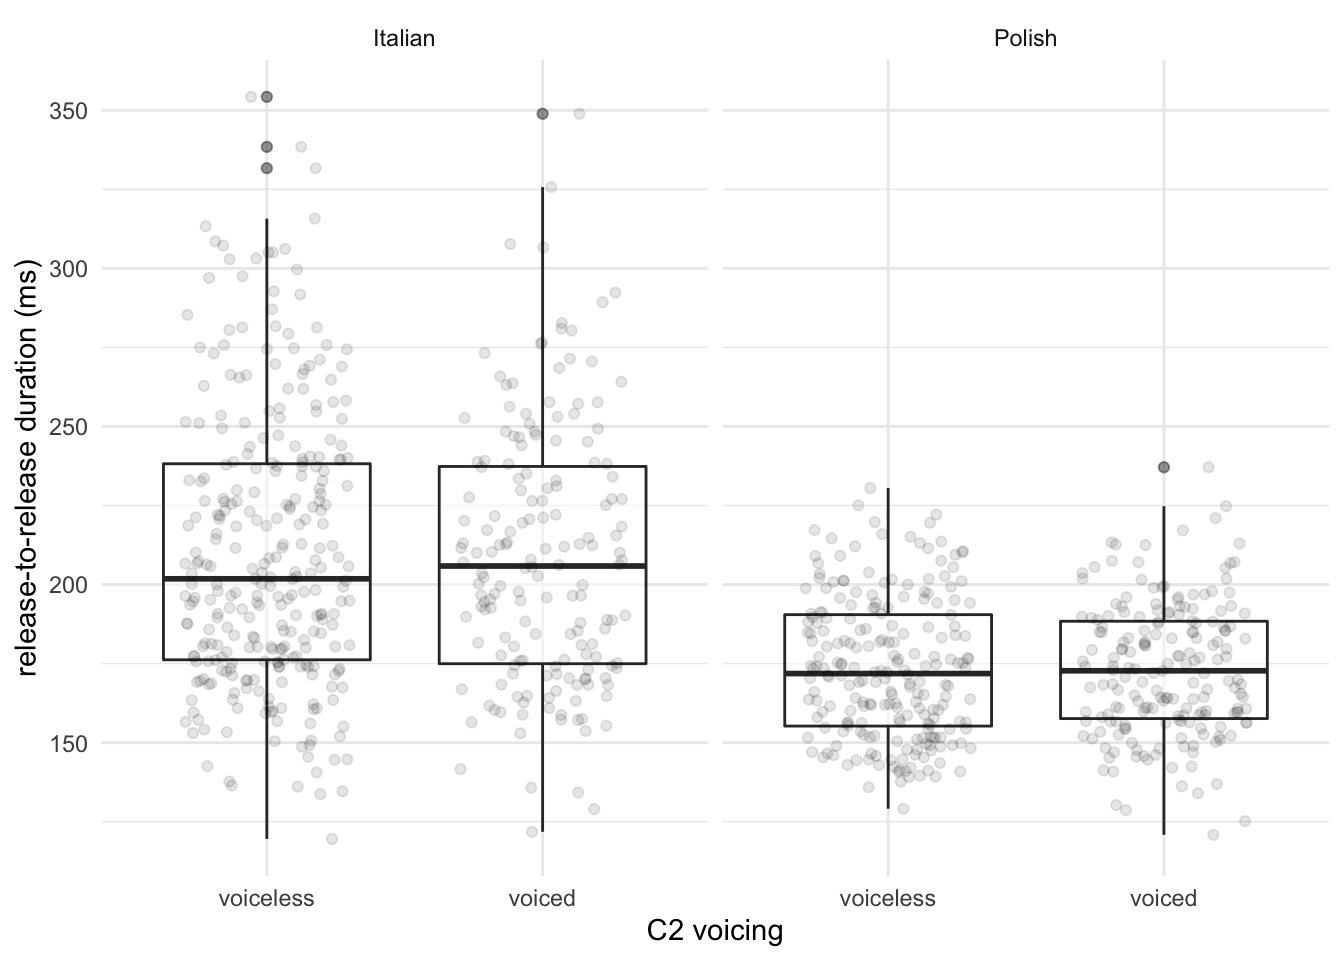 Raw data and boxplots of the duration in milliseconds of the release-to-release interval in Italian (left) and Polish (right) when C2 is voiceless or voiced.